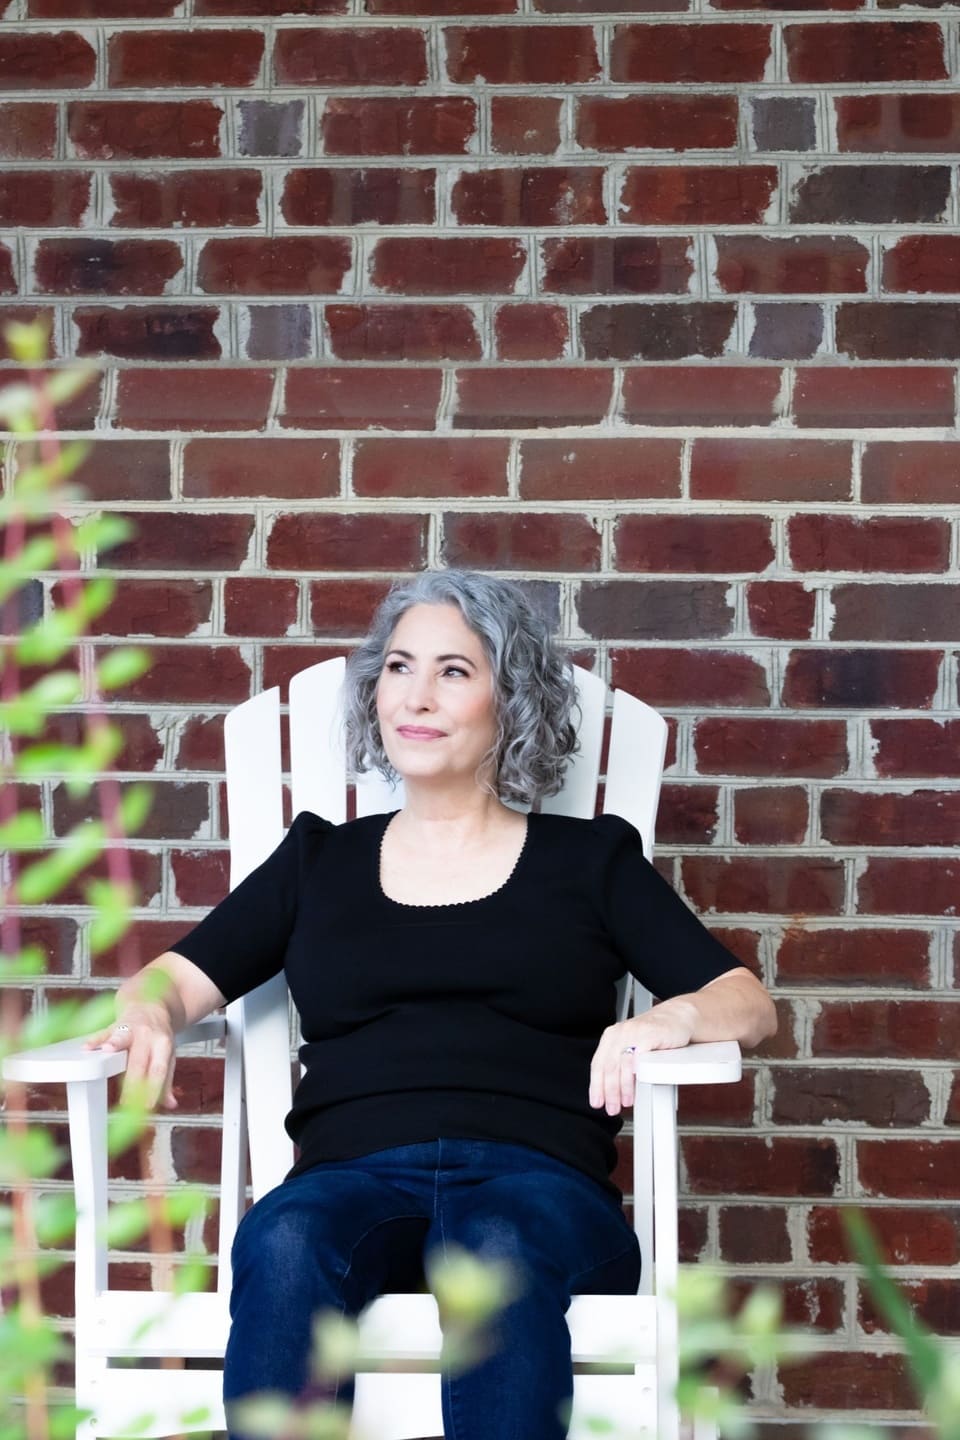 Woman with gray hair sitting against a brick wall